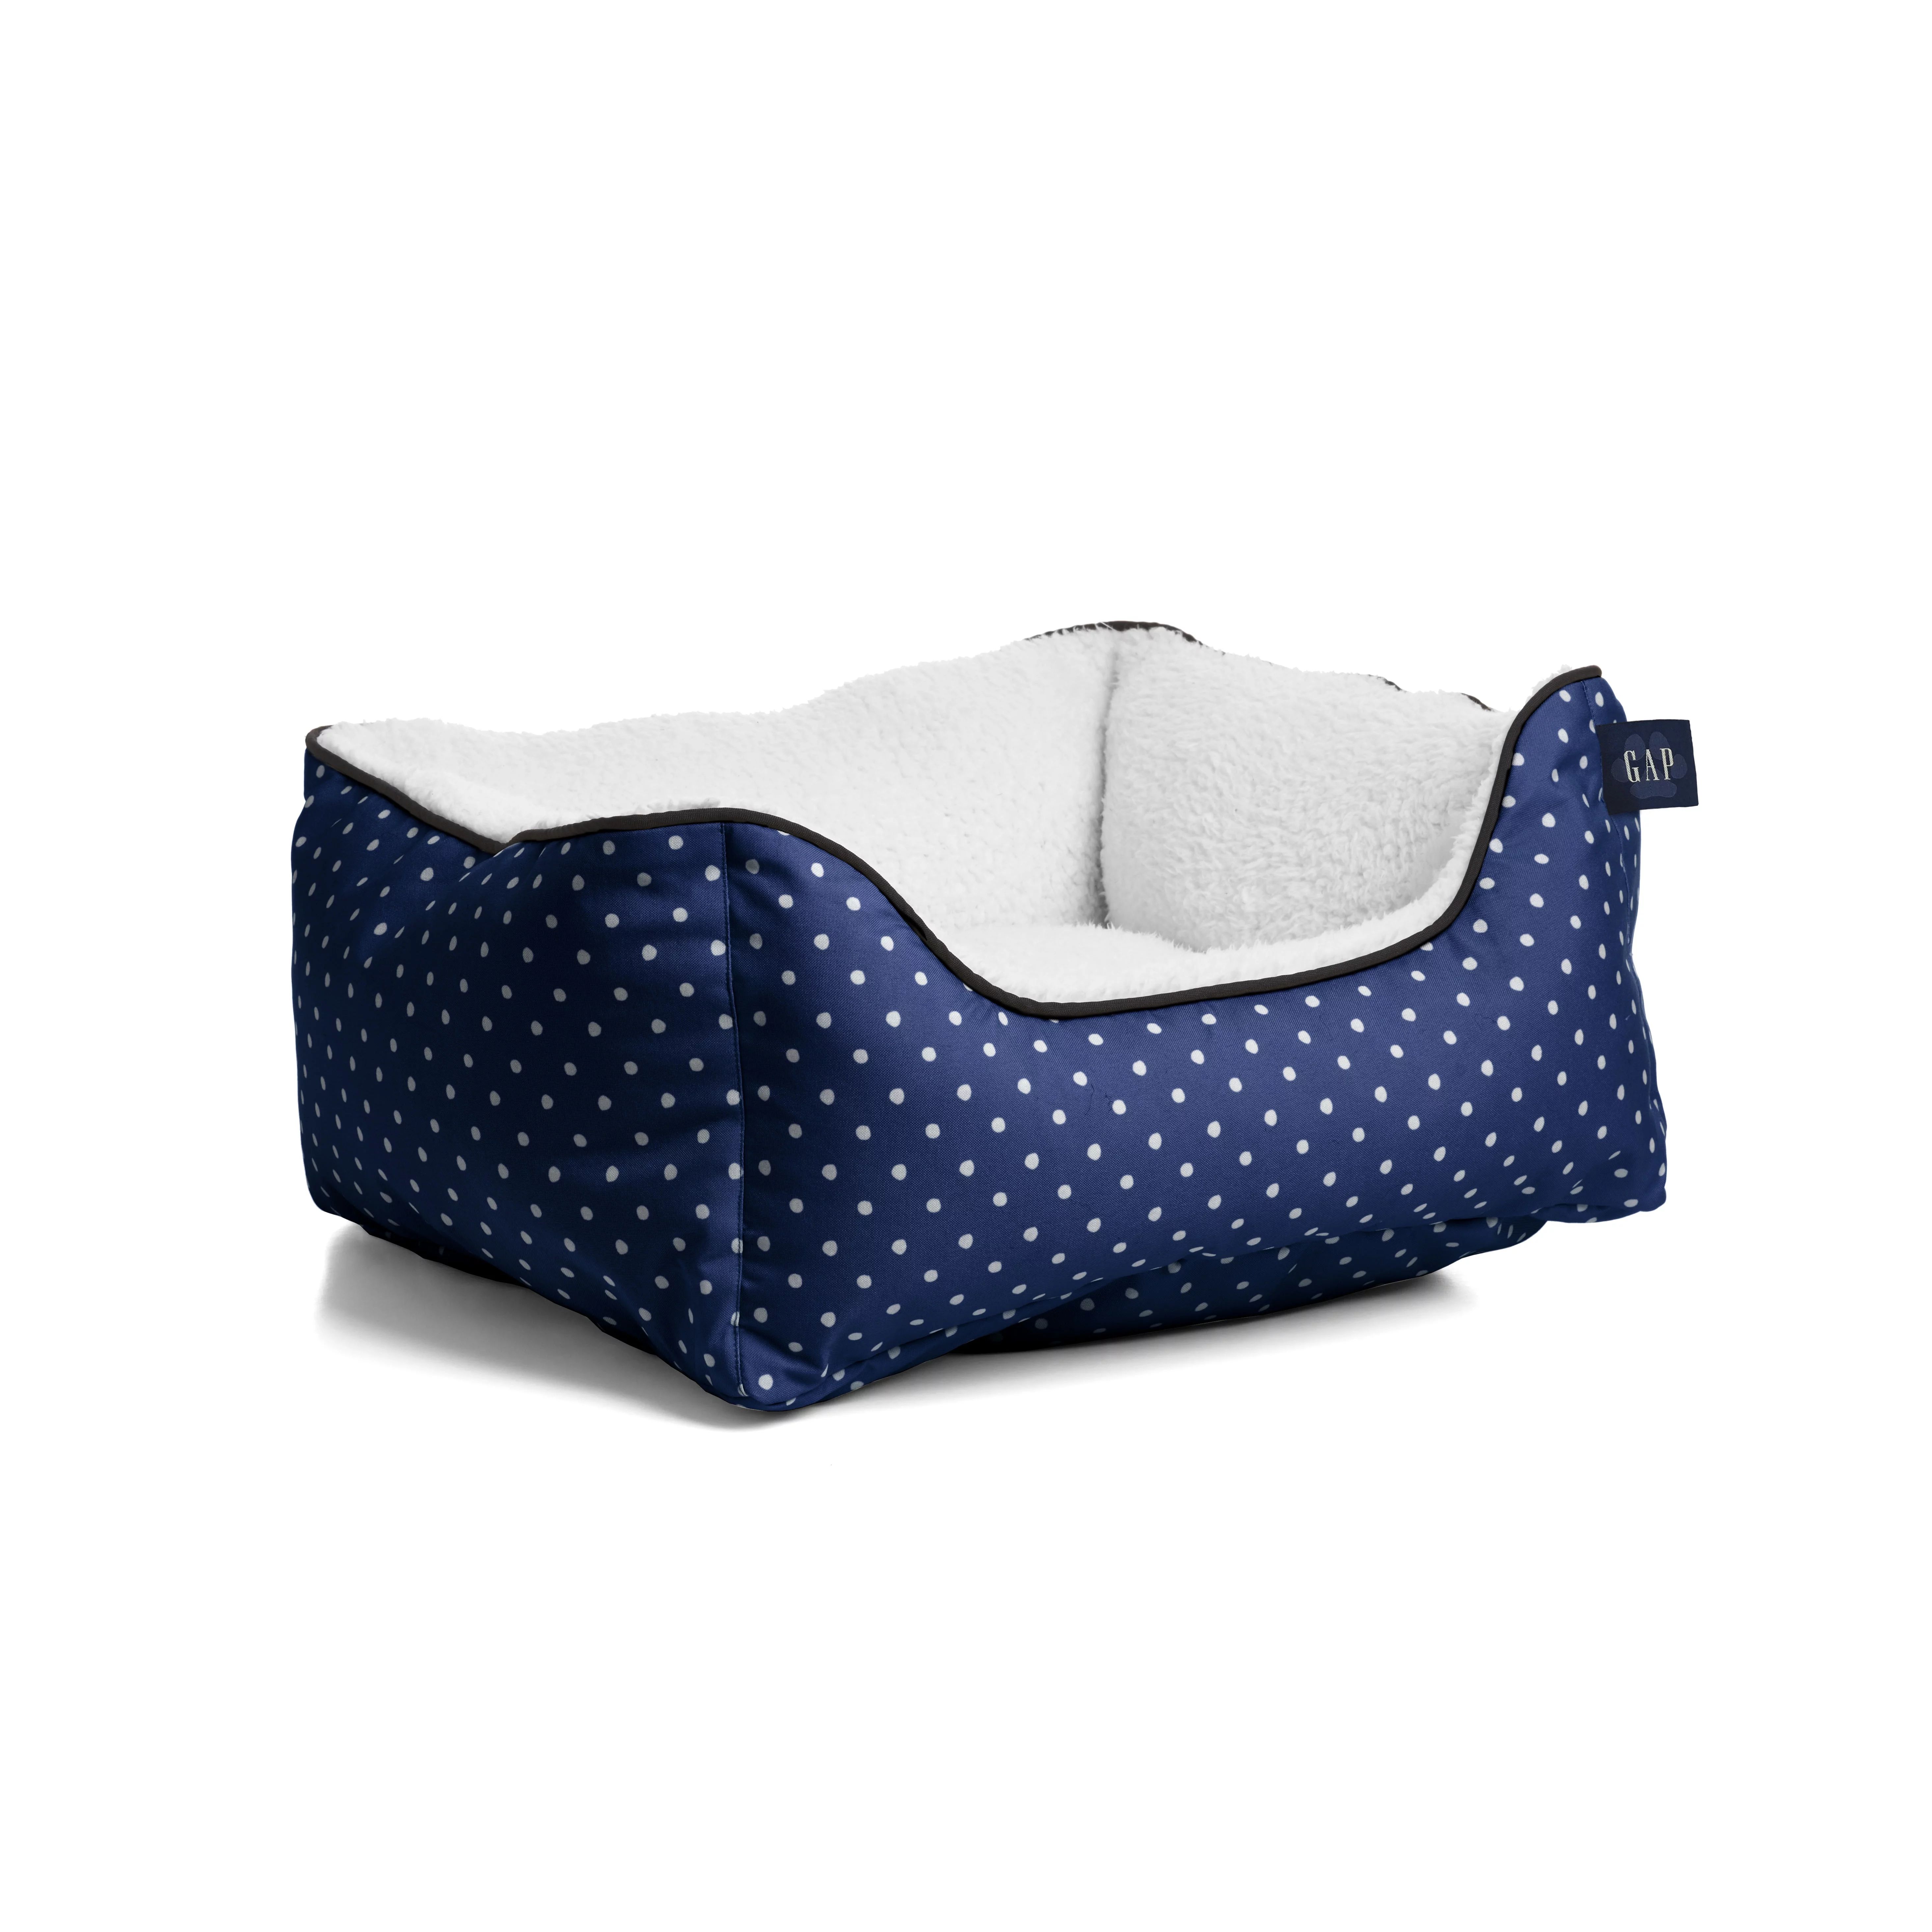 Gap Painted Dot Cuddler Pet Bed, Recycled Polyester Cover with Sherpa inner, Small 20"x18", Navy ... | Walmart (US)